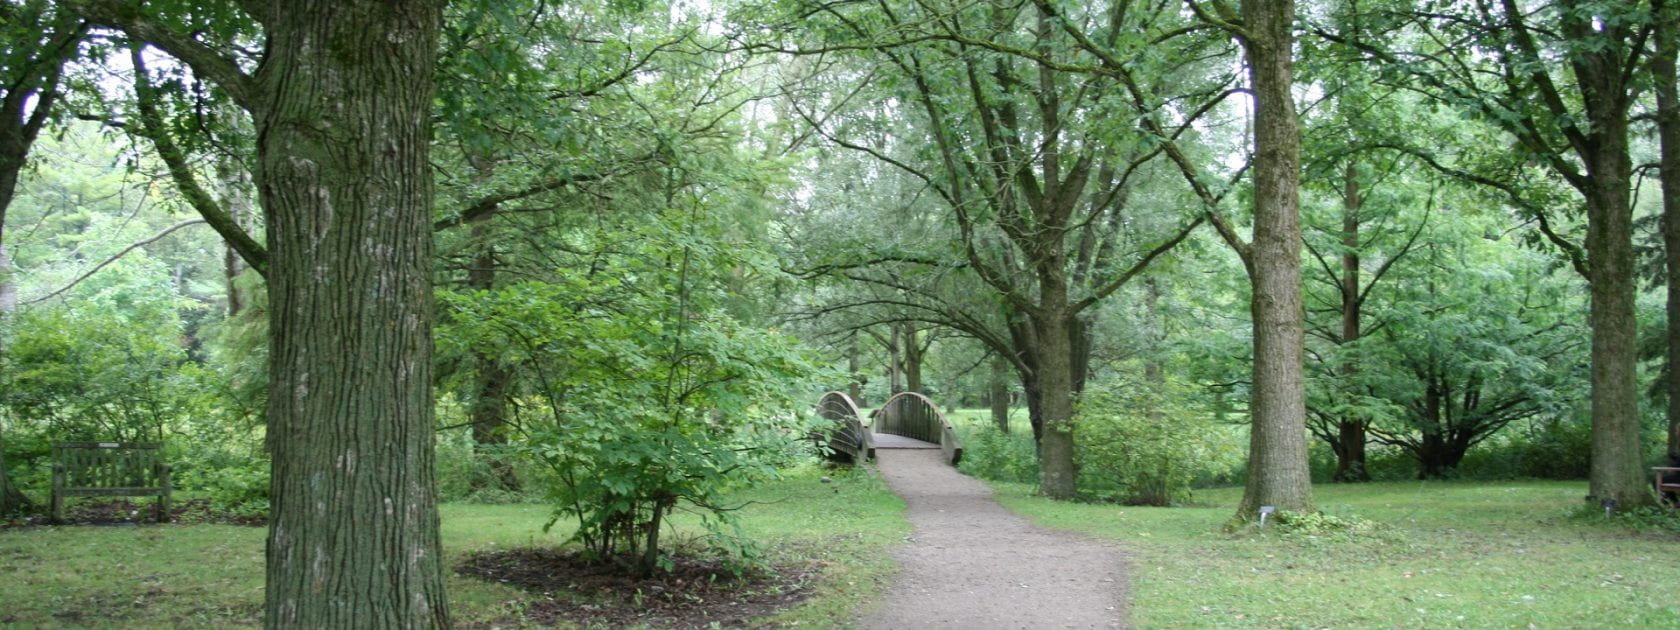 A gravel path moves away from the viewer and into the distance over a bridge. The area on both sides of the path is green and filled with tall trees.